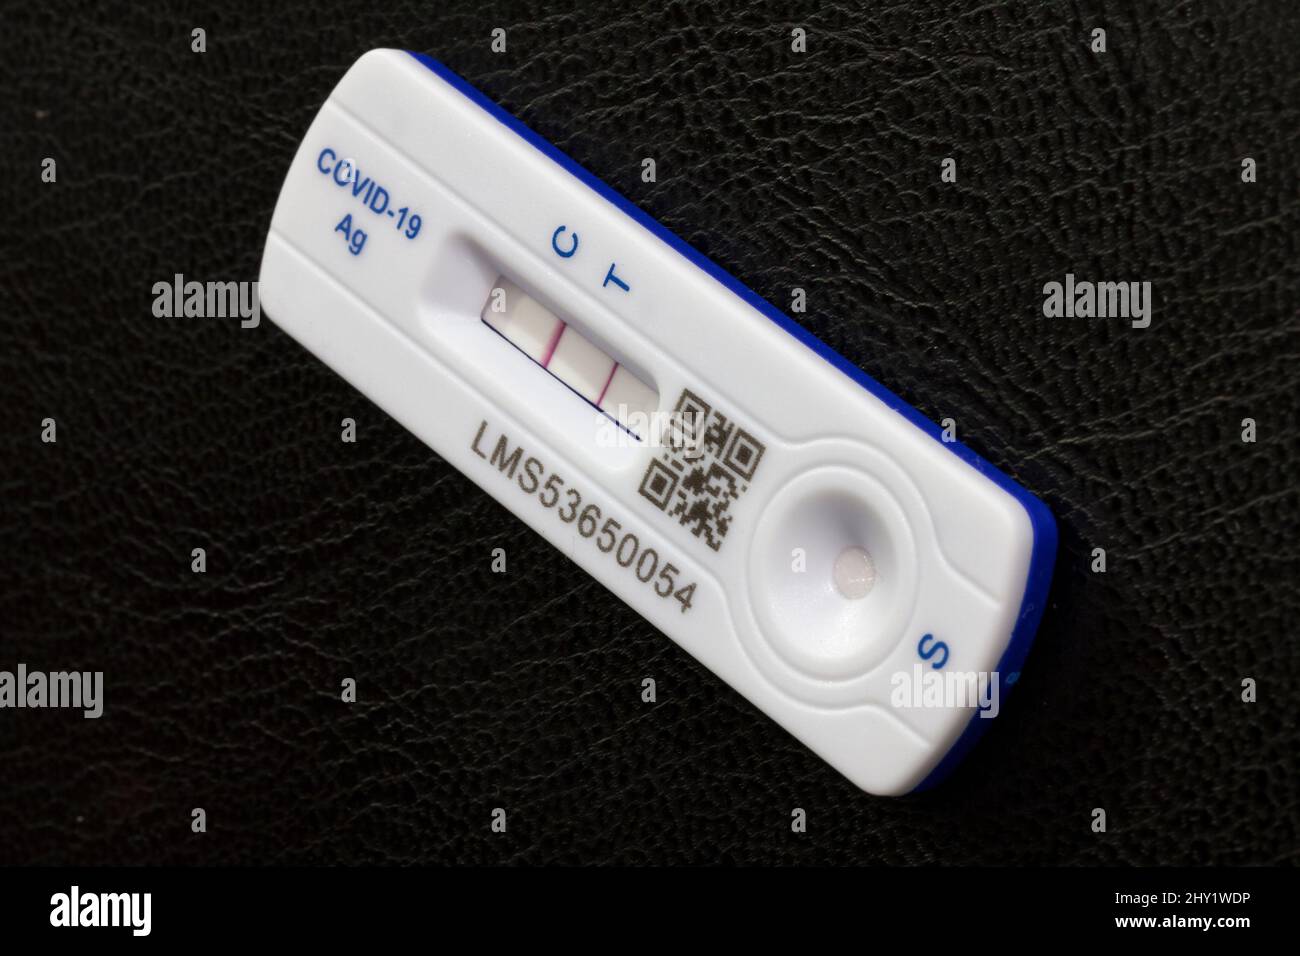 Positive Covid 19 lateral flow test / rapid lateral flow antigen coronavirus test on a black background  showing both bars on the test strip Stock Photo